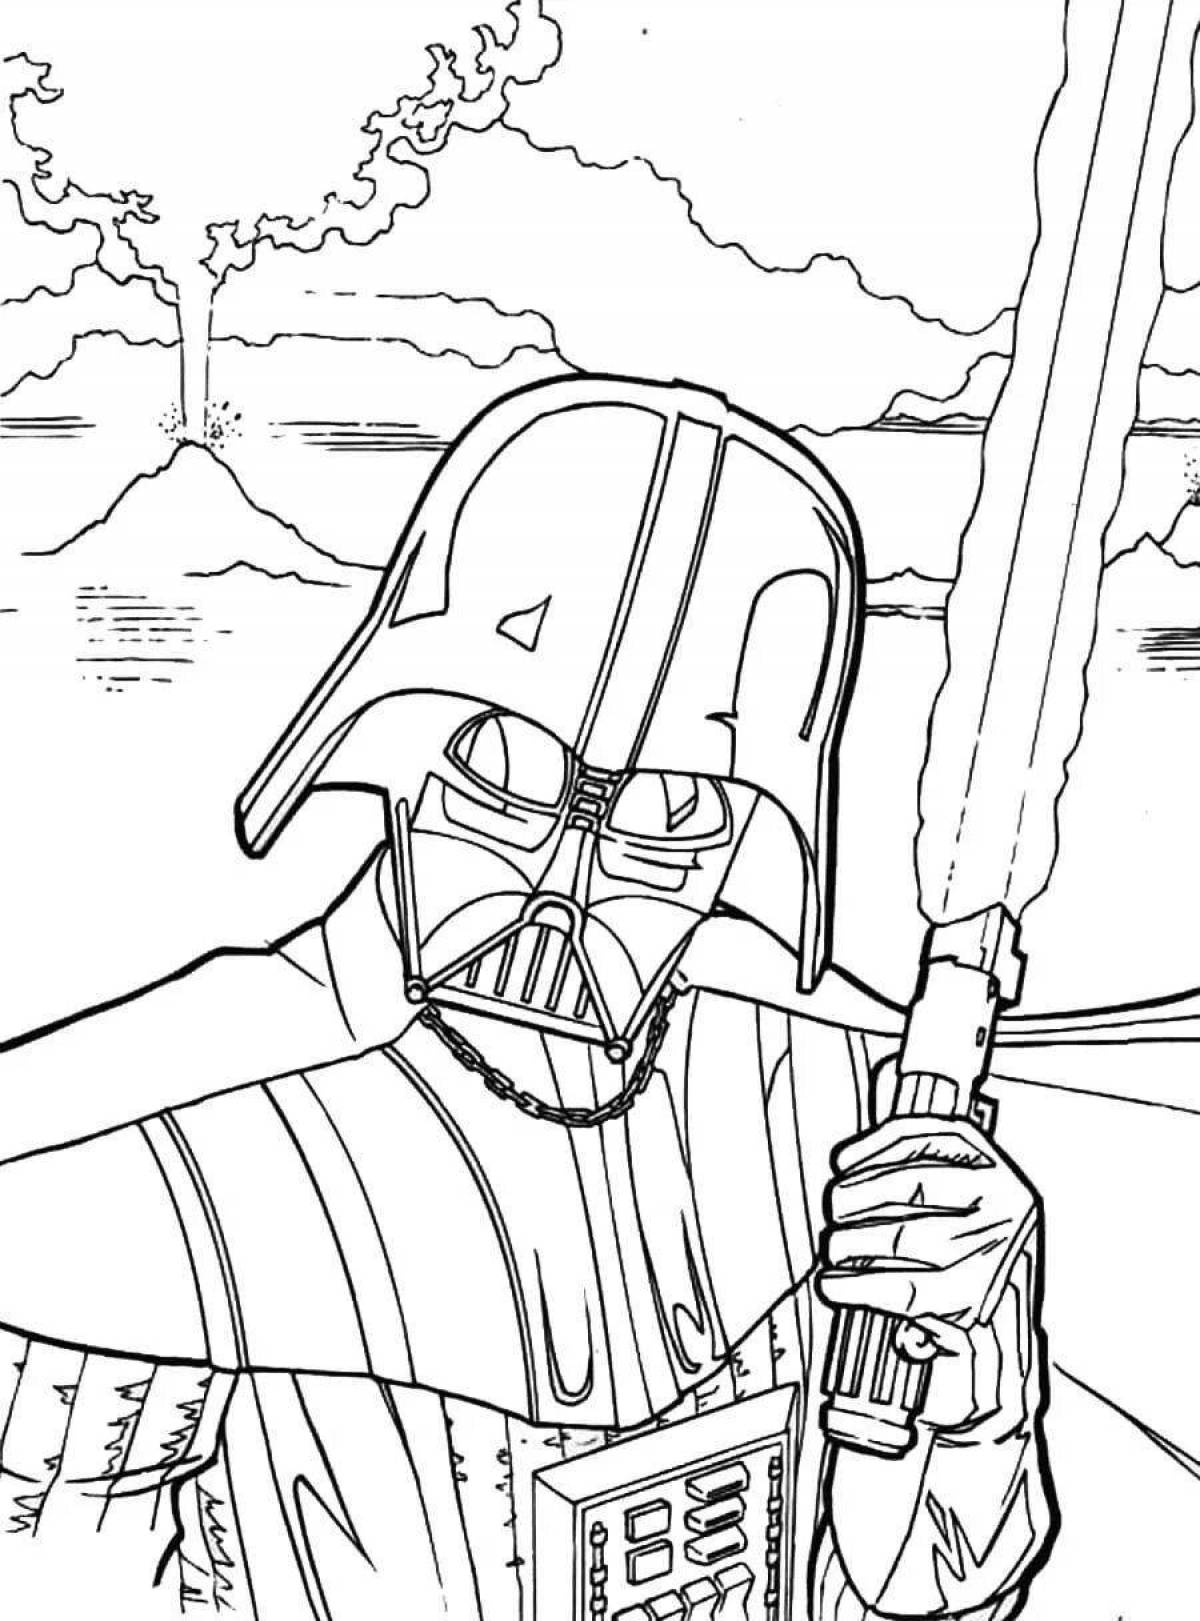 Amazing star wars coloring book for boys